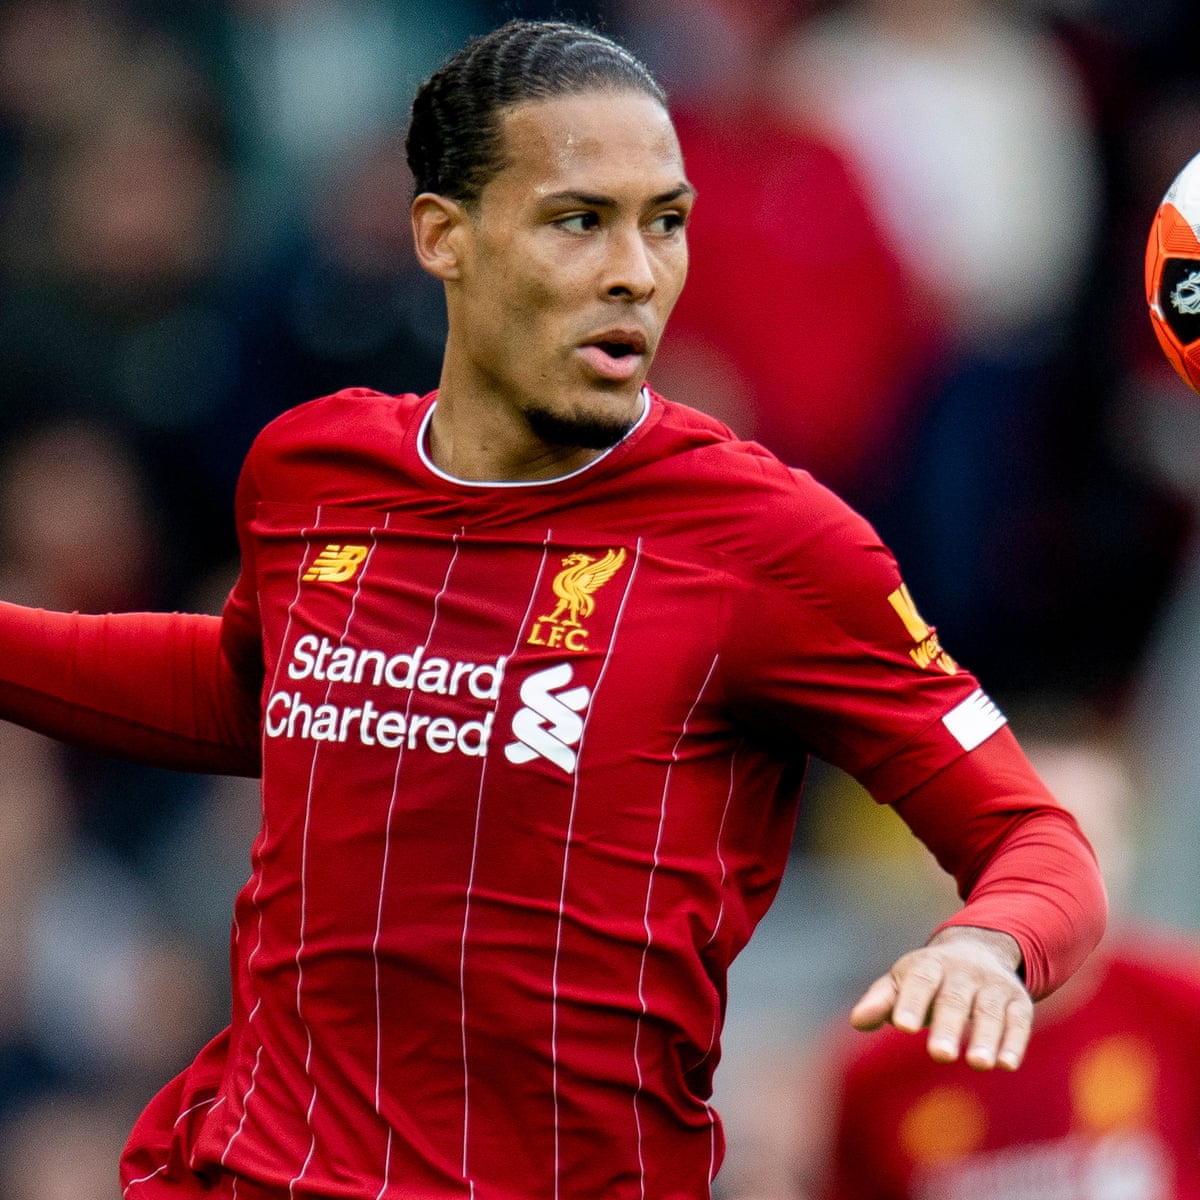 RIO TALKS ABOUT Virgil van Dijk: 'Some suggest I make it look easy, but every game is  tough' | Liverpool - BLOGARENA